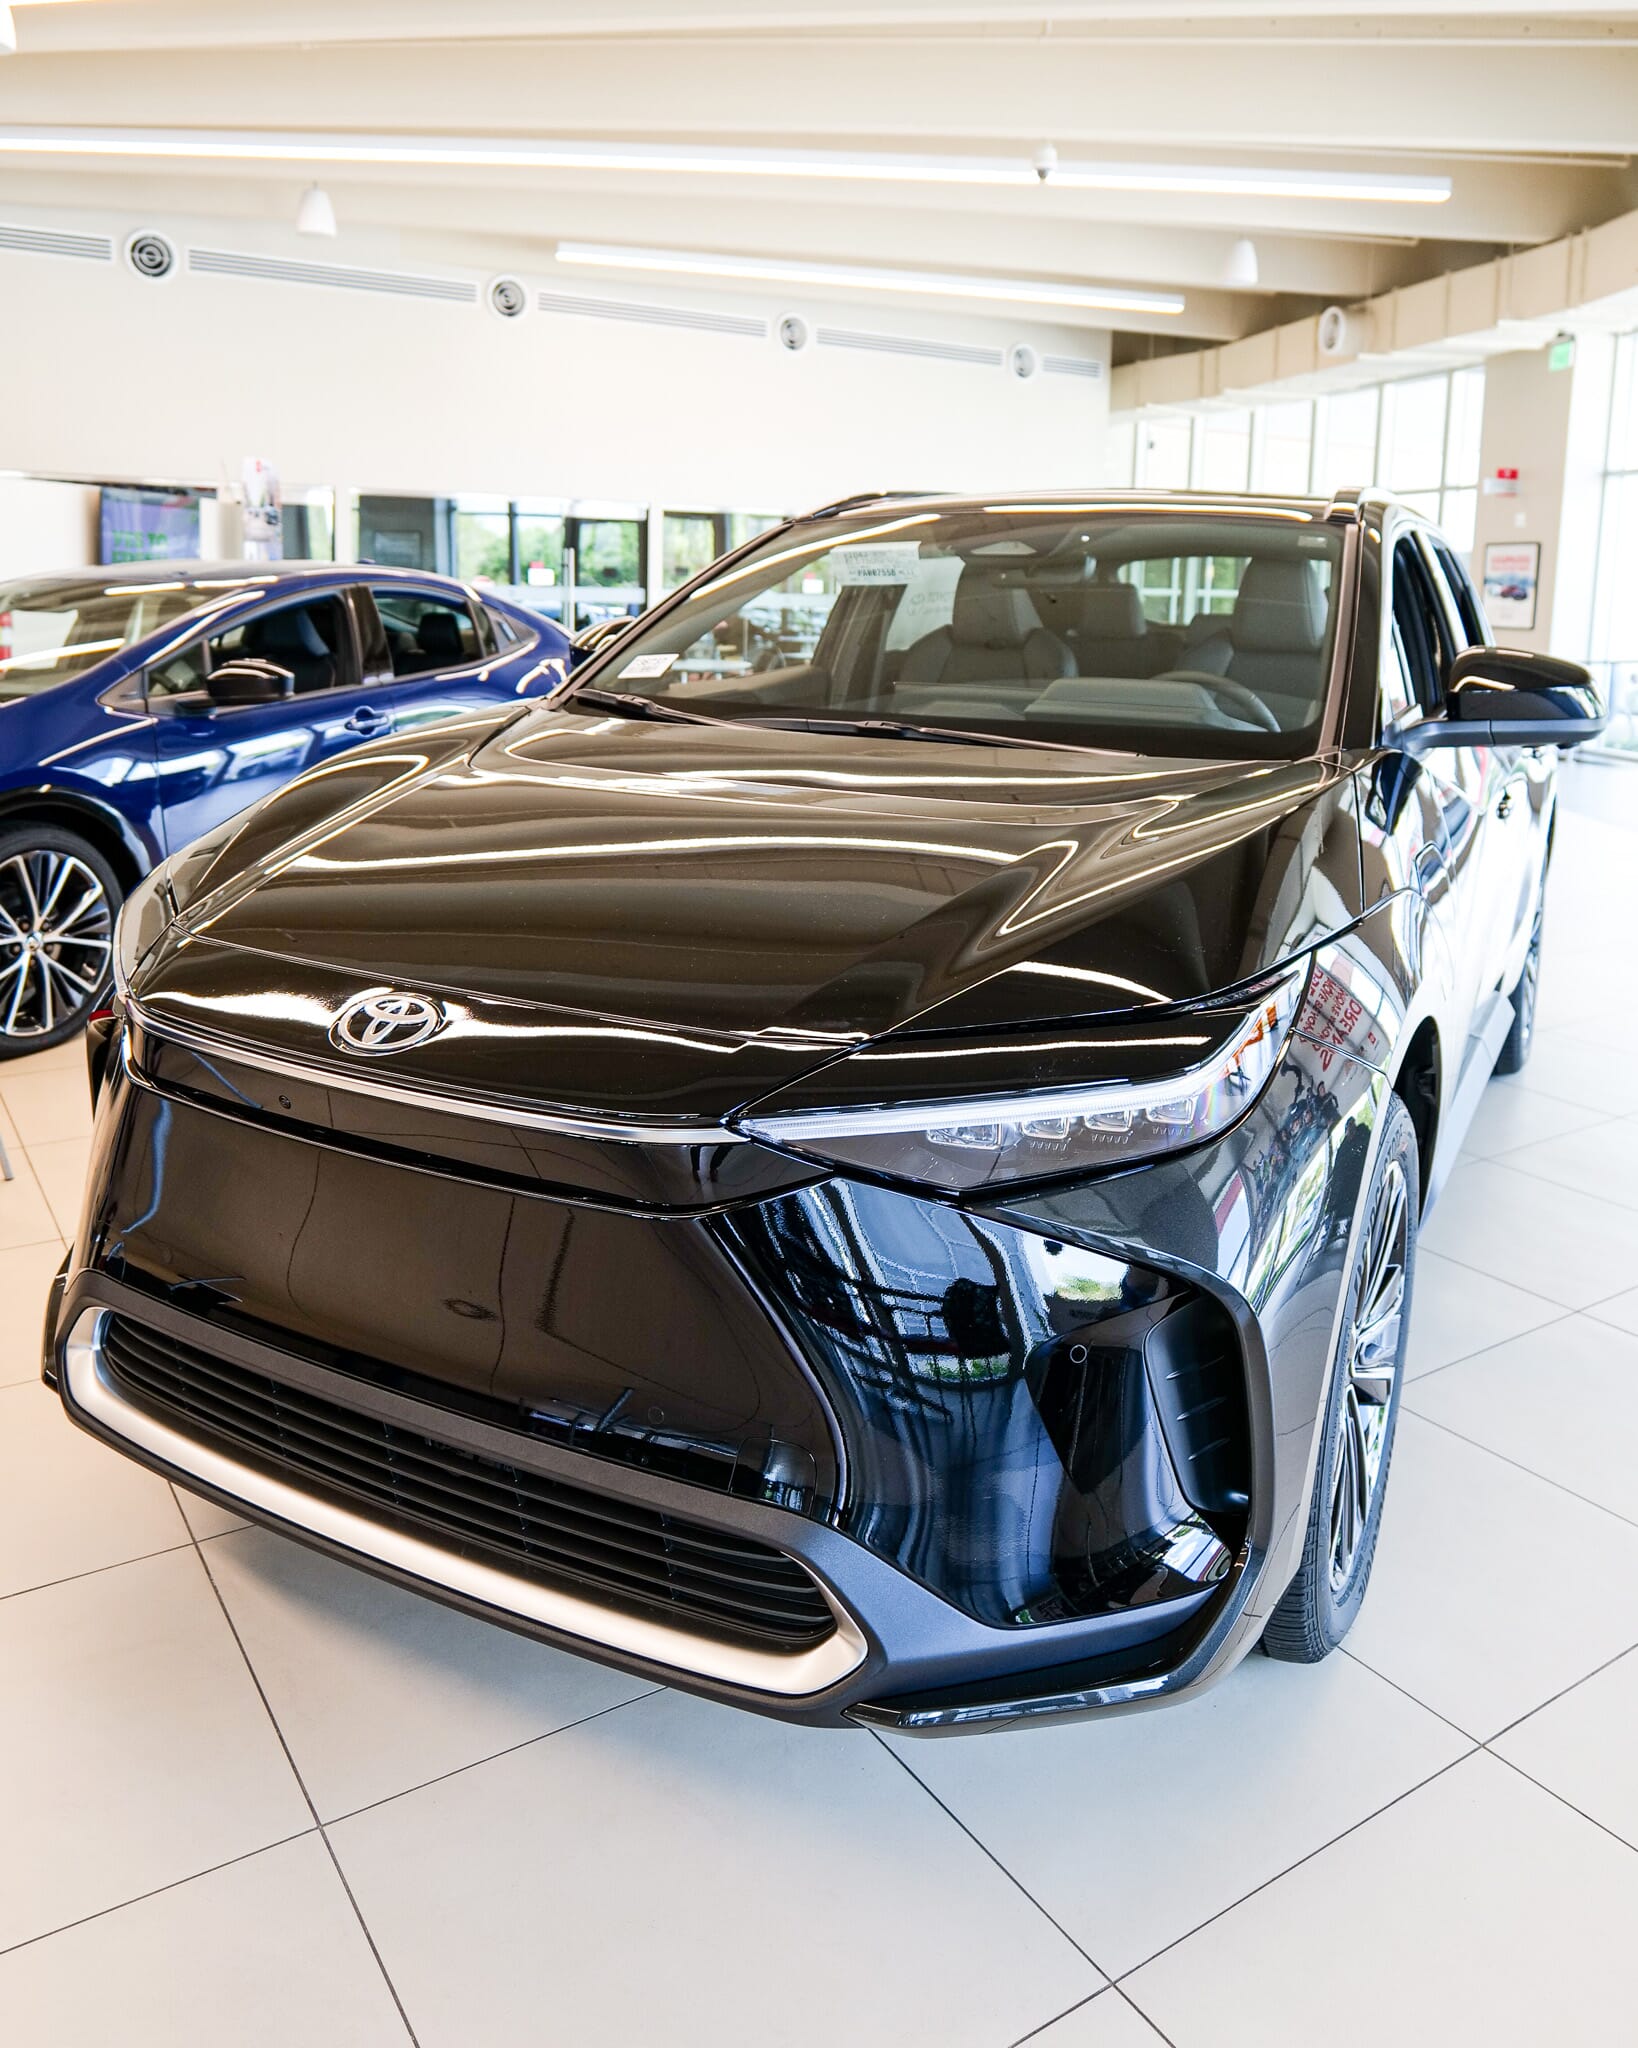 The all-new Toyota bZ4X is here at Kendall Toyota